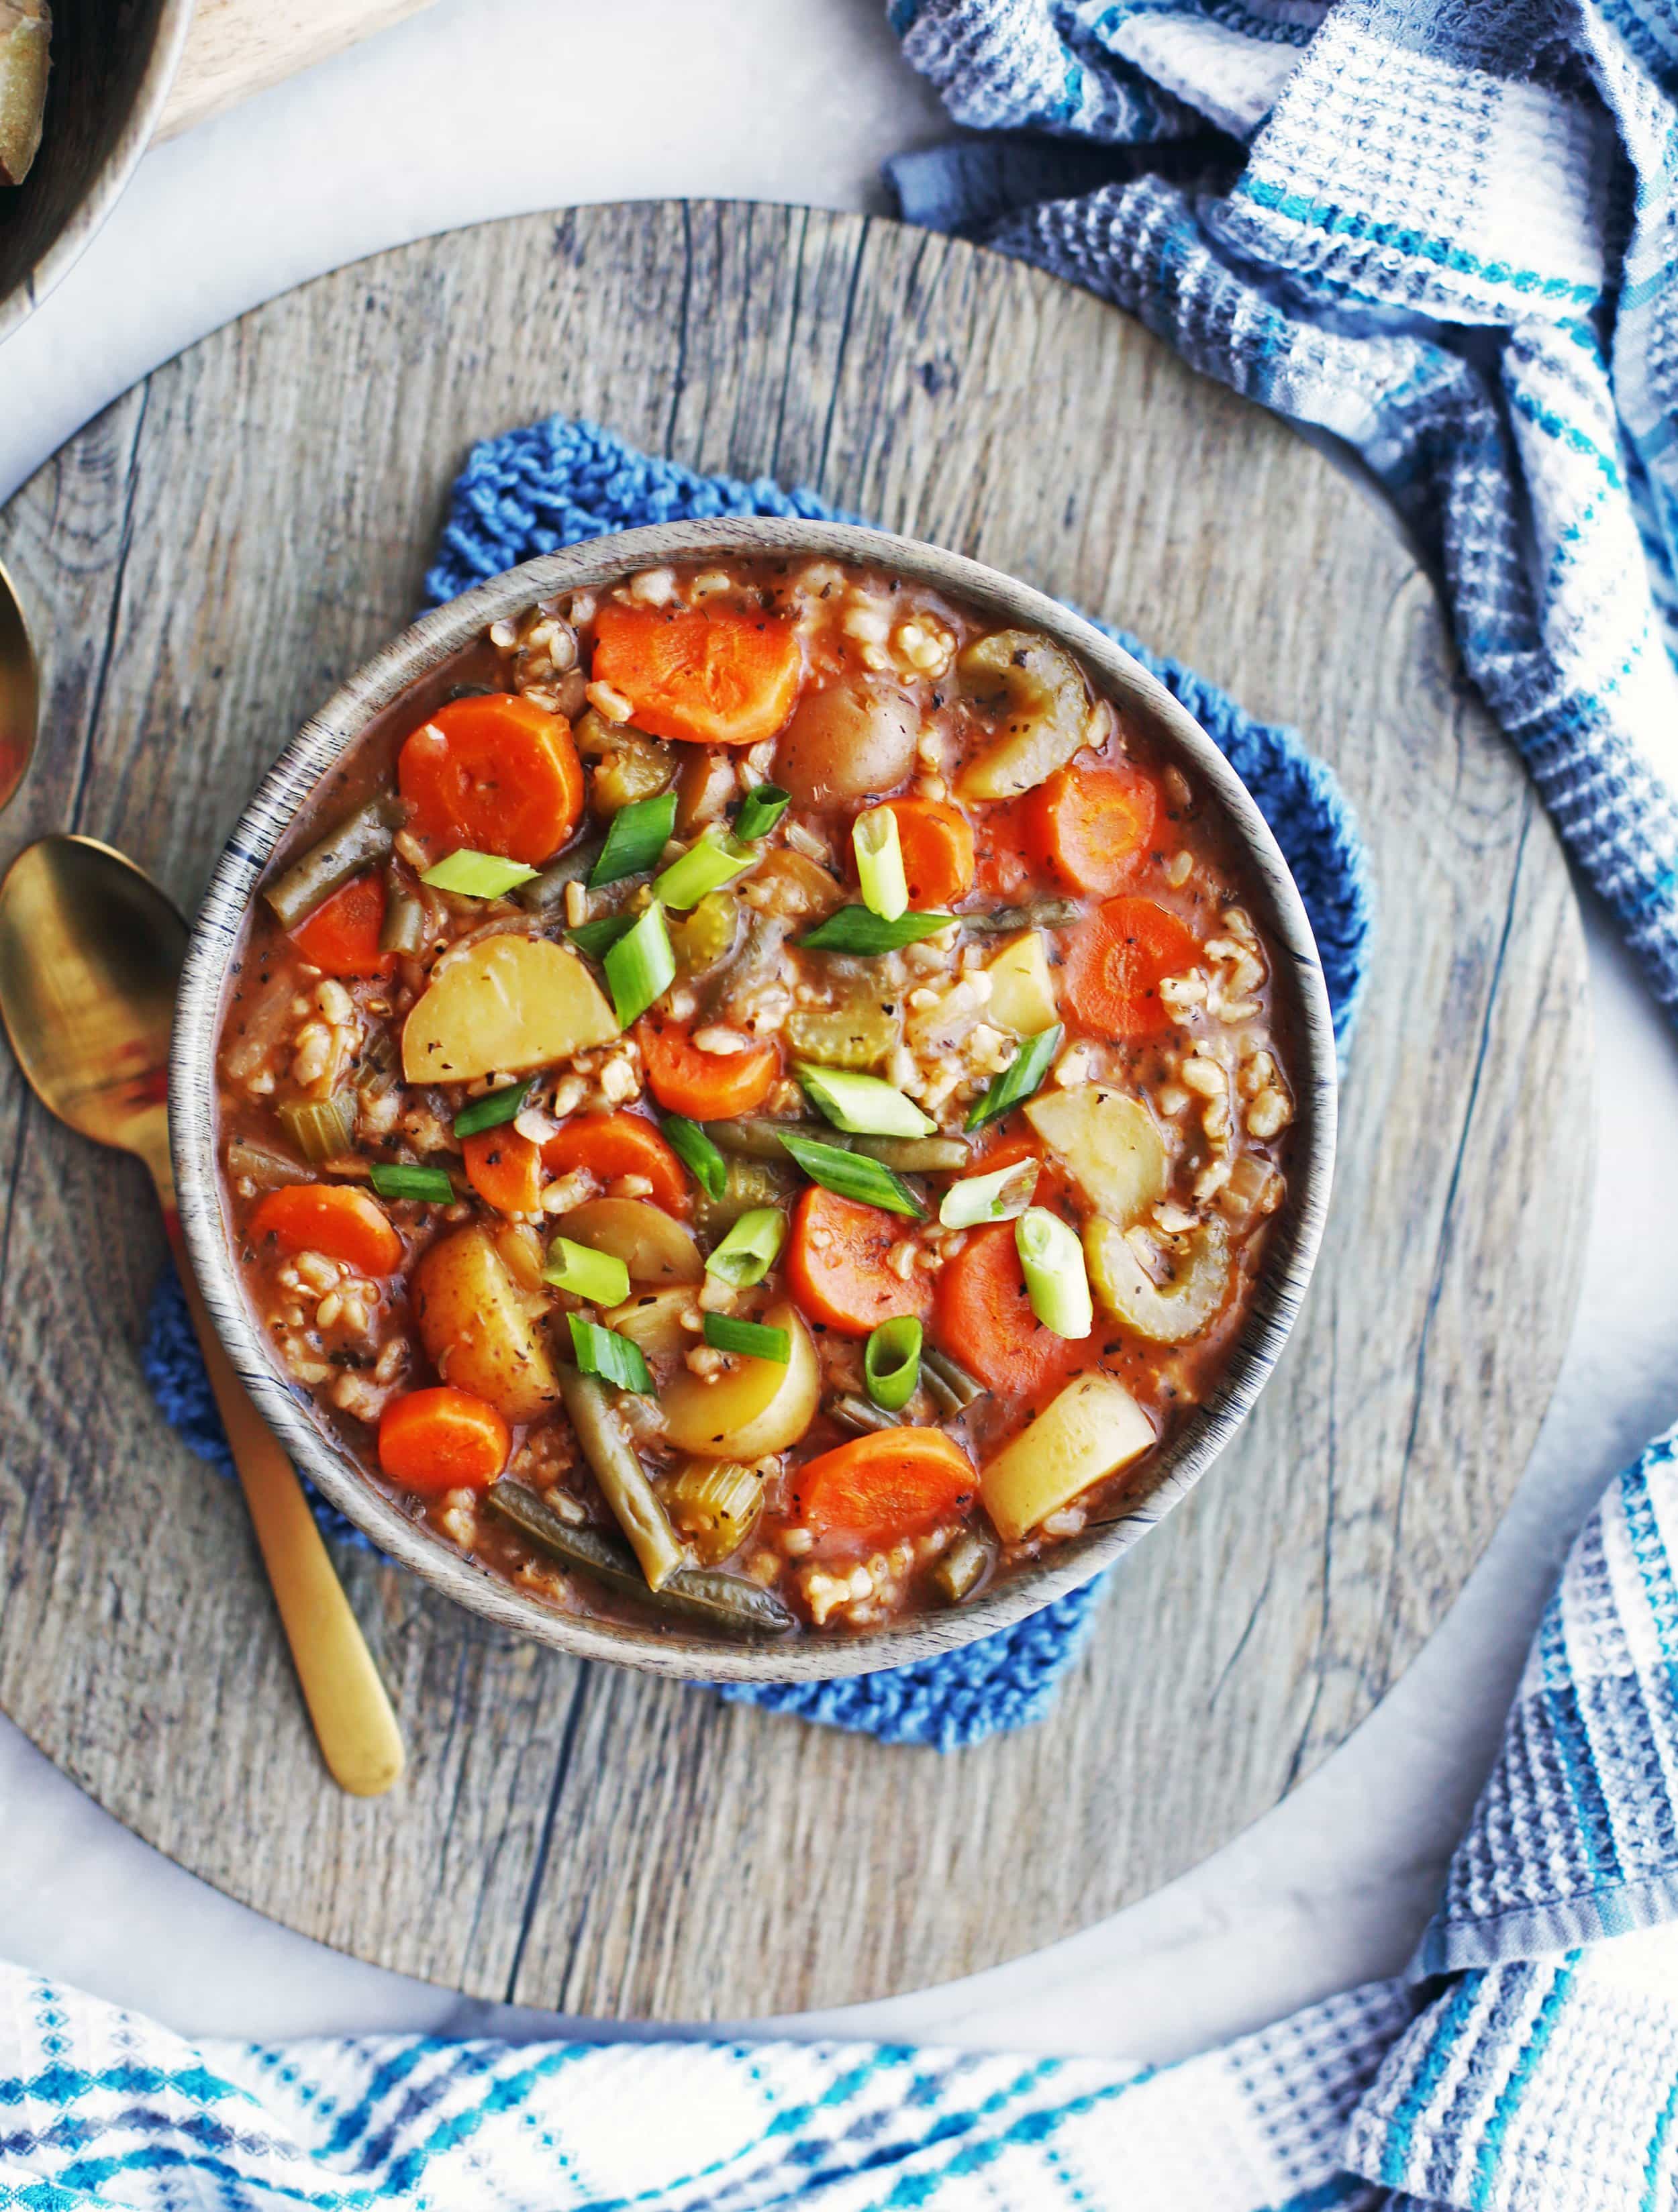 Instant Pot Hearty Vegetable and Brown Rice Soup - Yay! For Food